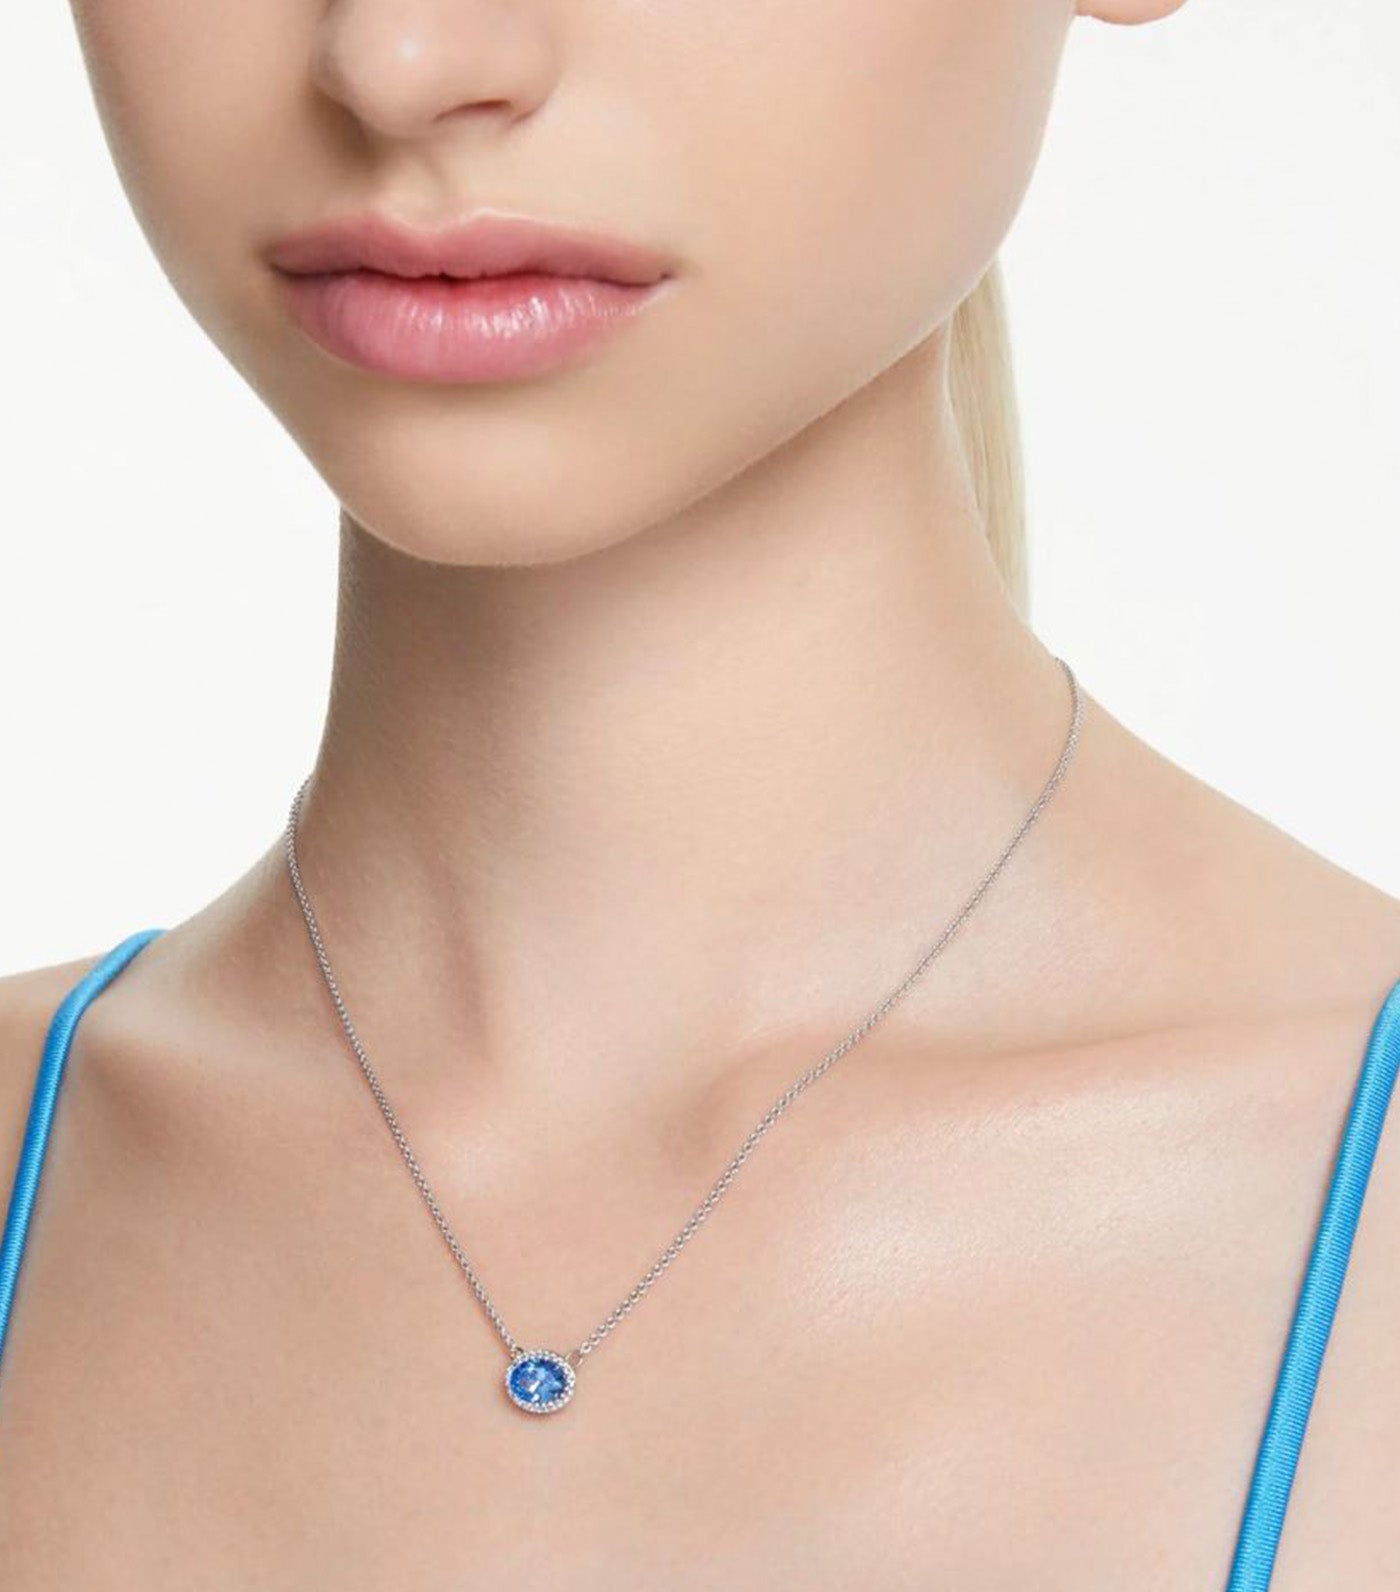 Constella Necklace Oval Cut Blue Rhodium Plated